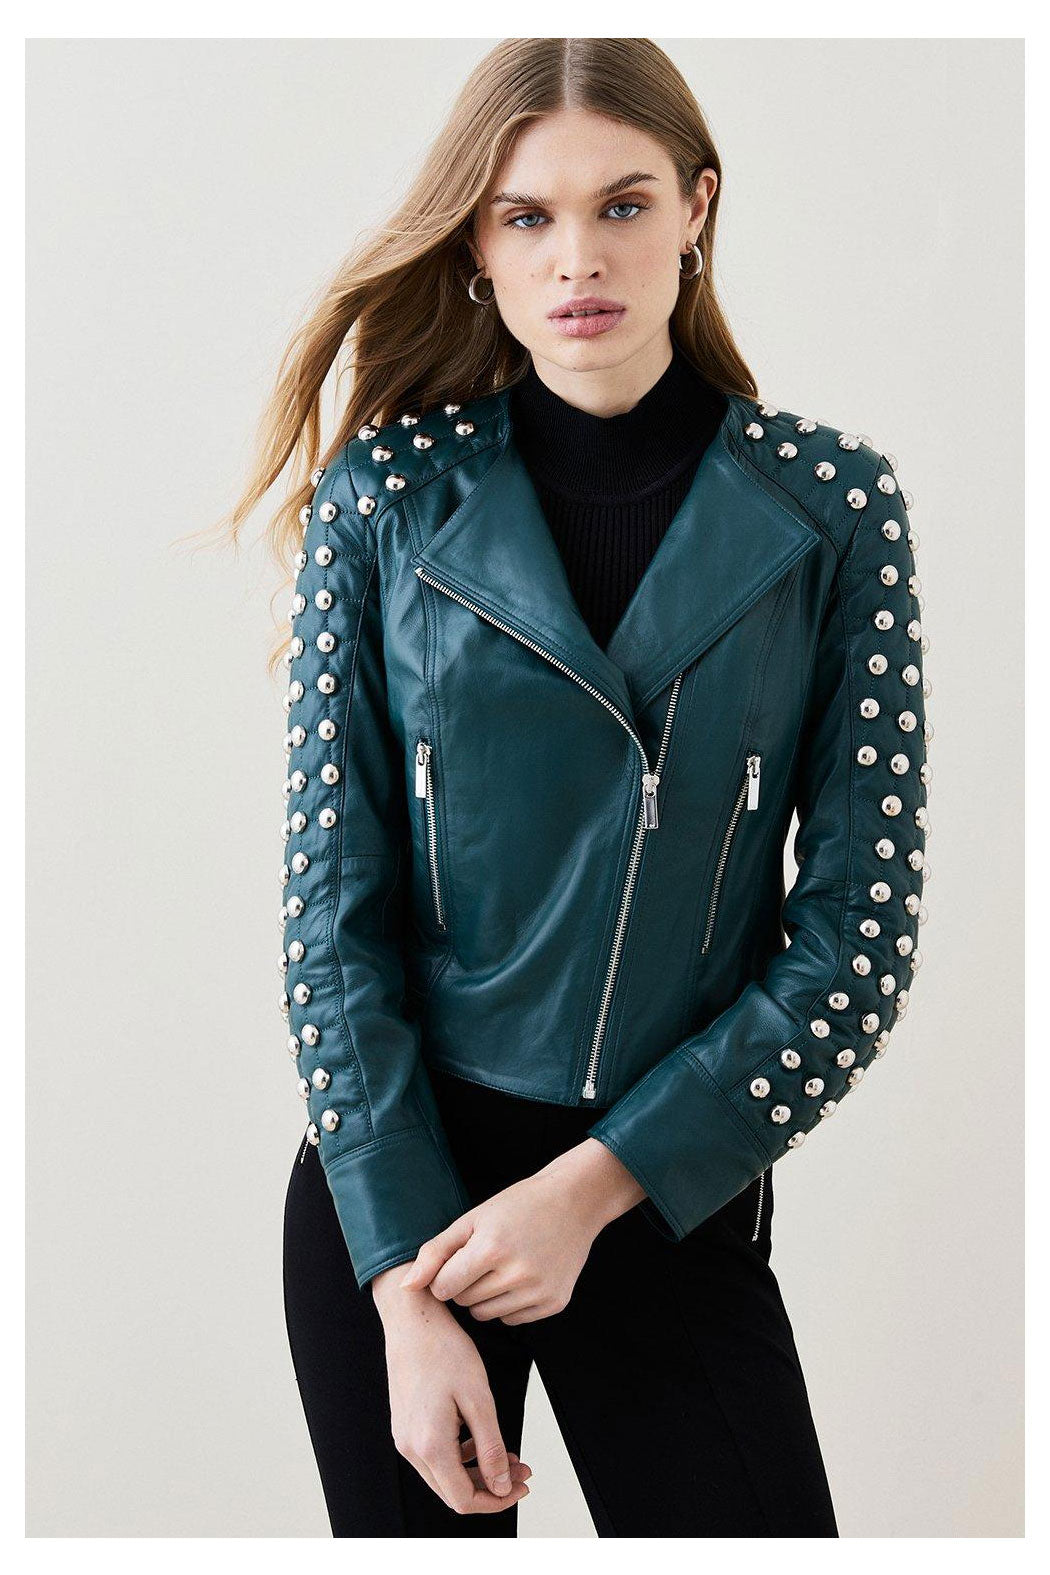 Women Style Silver Spiked Studded Motorcycle Leather Jacket With Chocolat Green